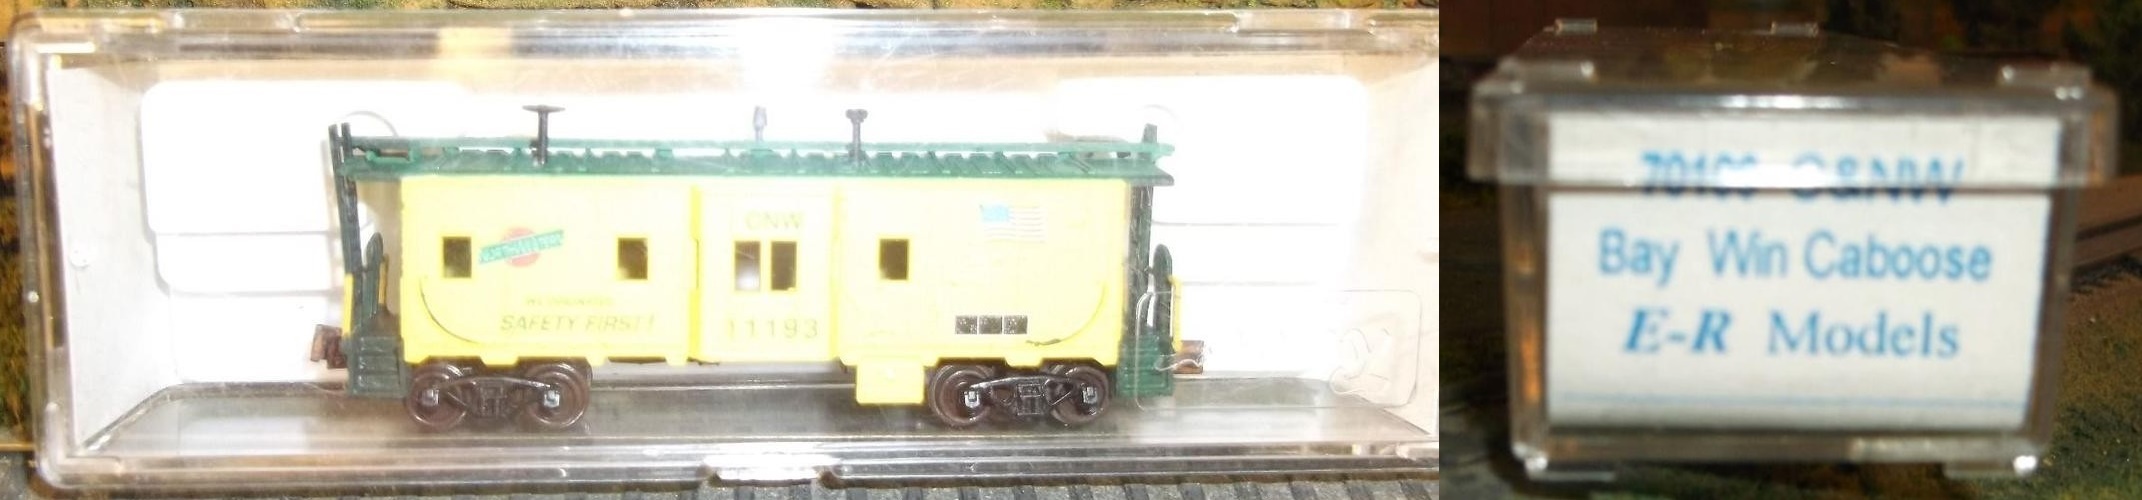 N Scale - E-R Models - 70106 - Caboose, Bay Window - Chicago & North Western - 11193